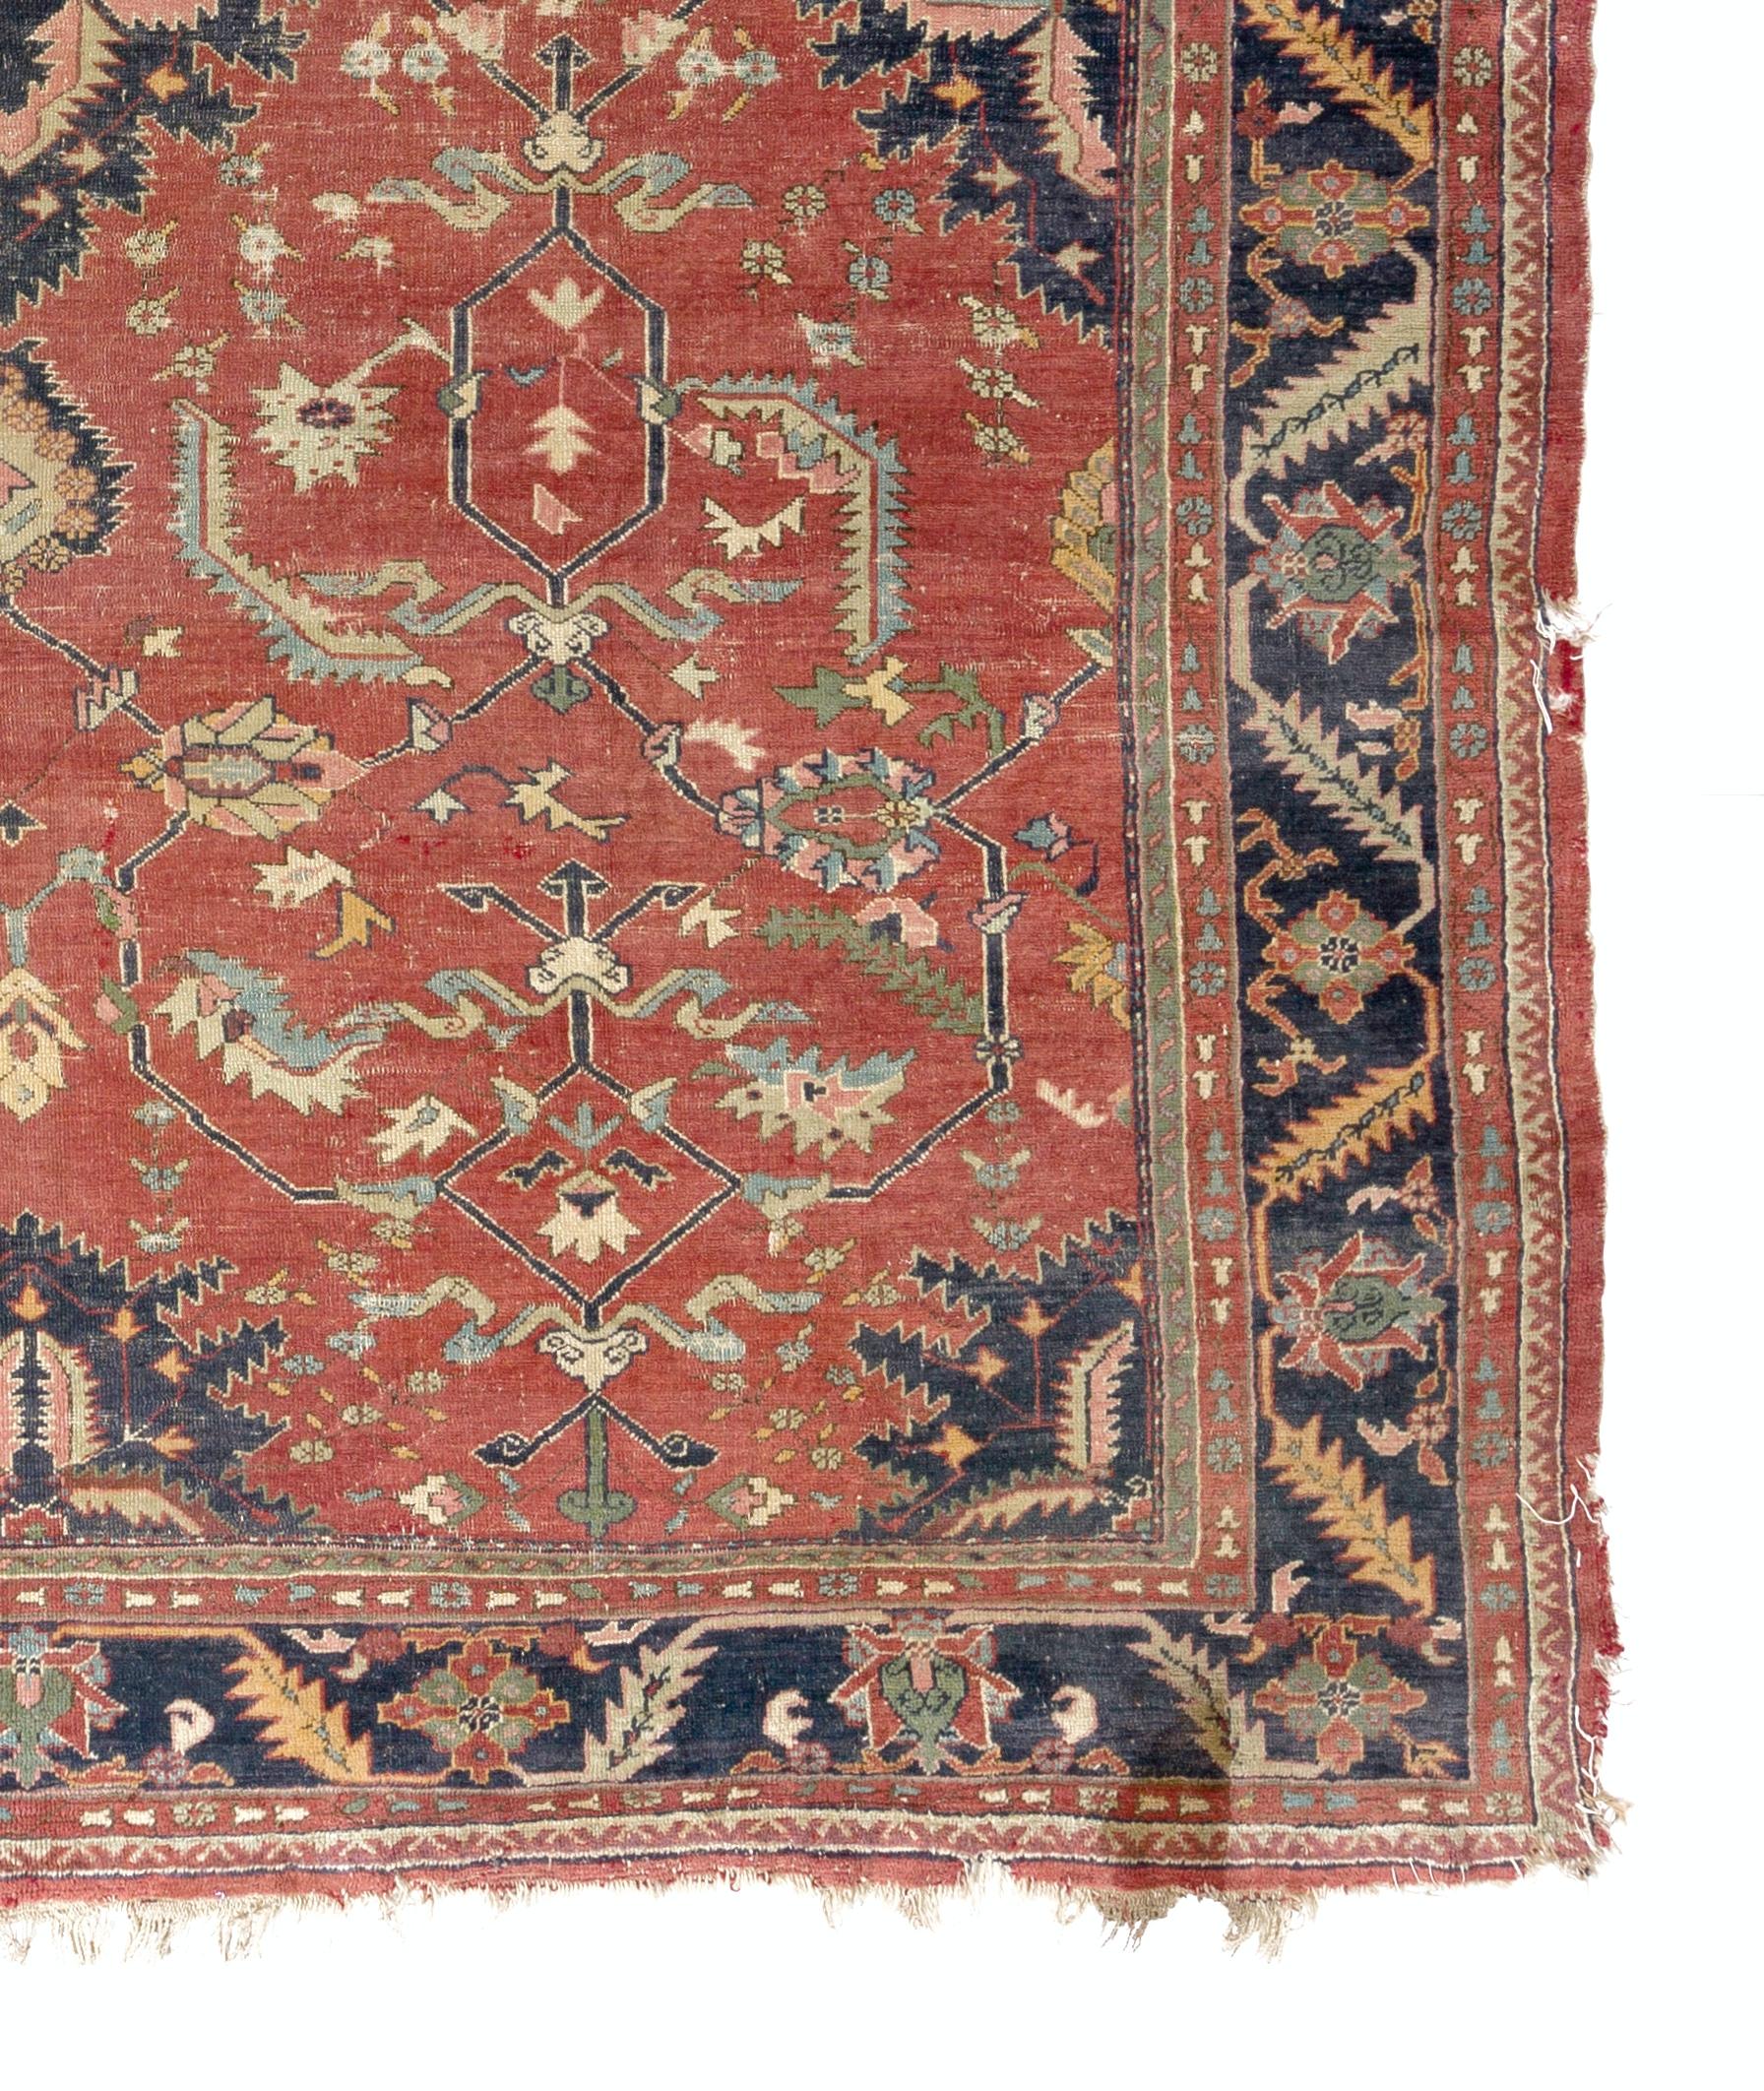 10.7x12.4 ft Antique Turkish Oushak Rug In Good Condition For Sale In Philadelphia, PA